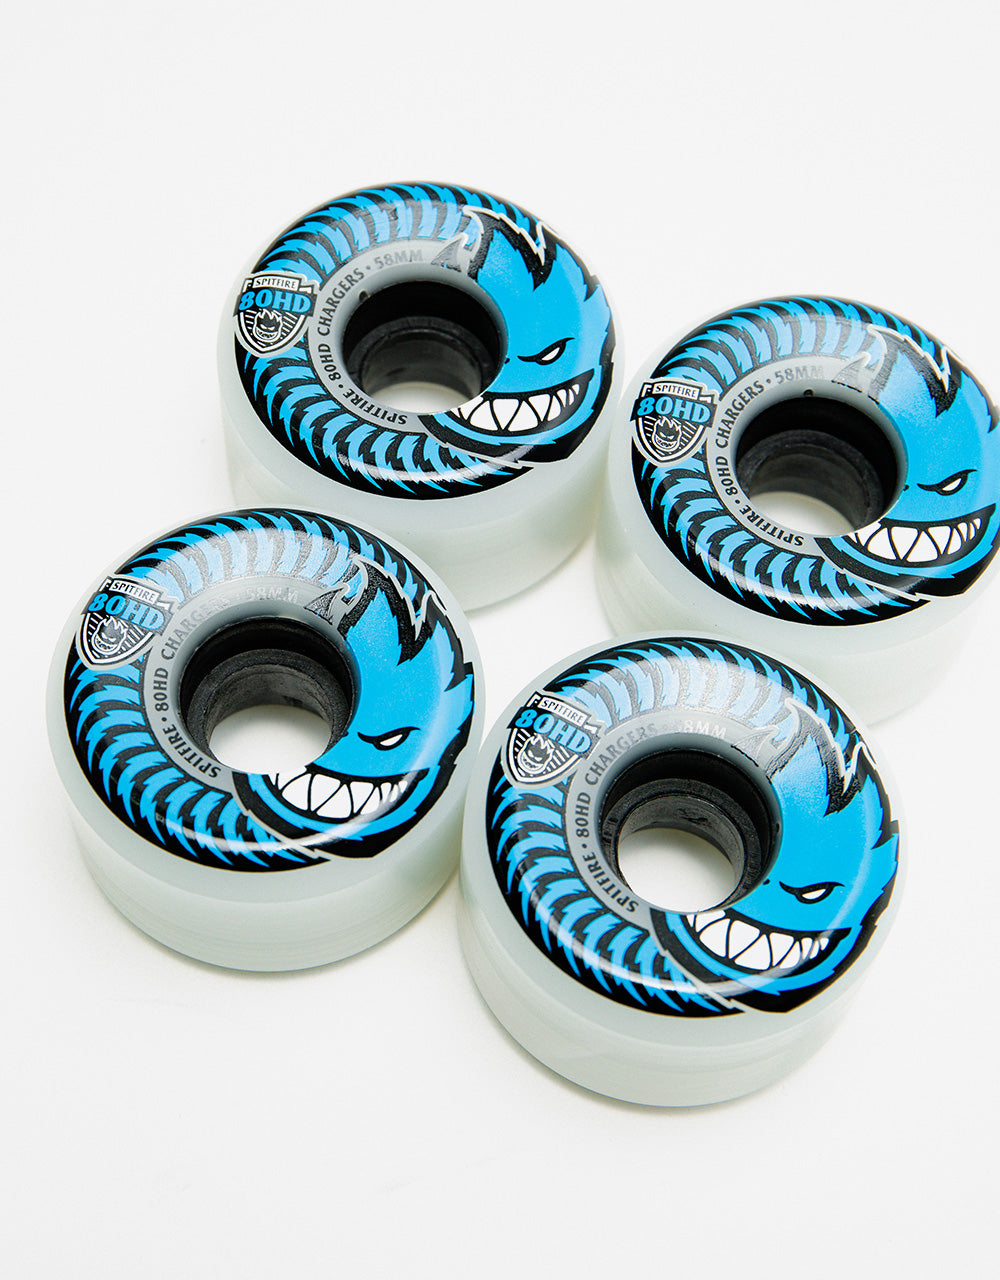 Spitfire Chargers Conical 80HD Skateboard Wheel - 58mm